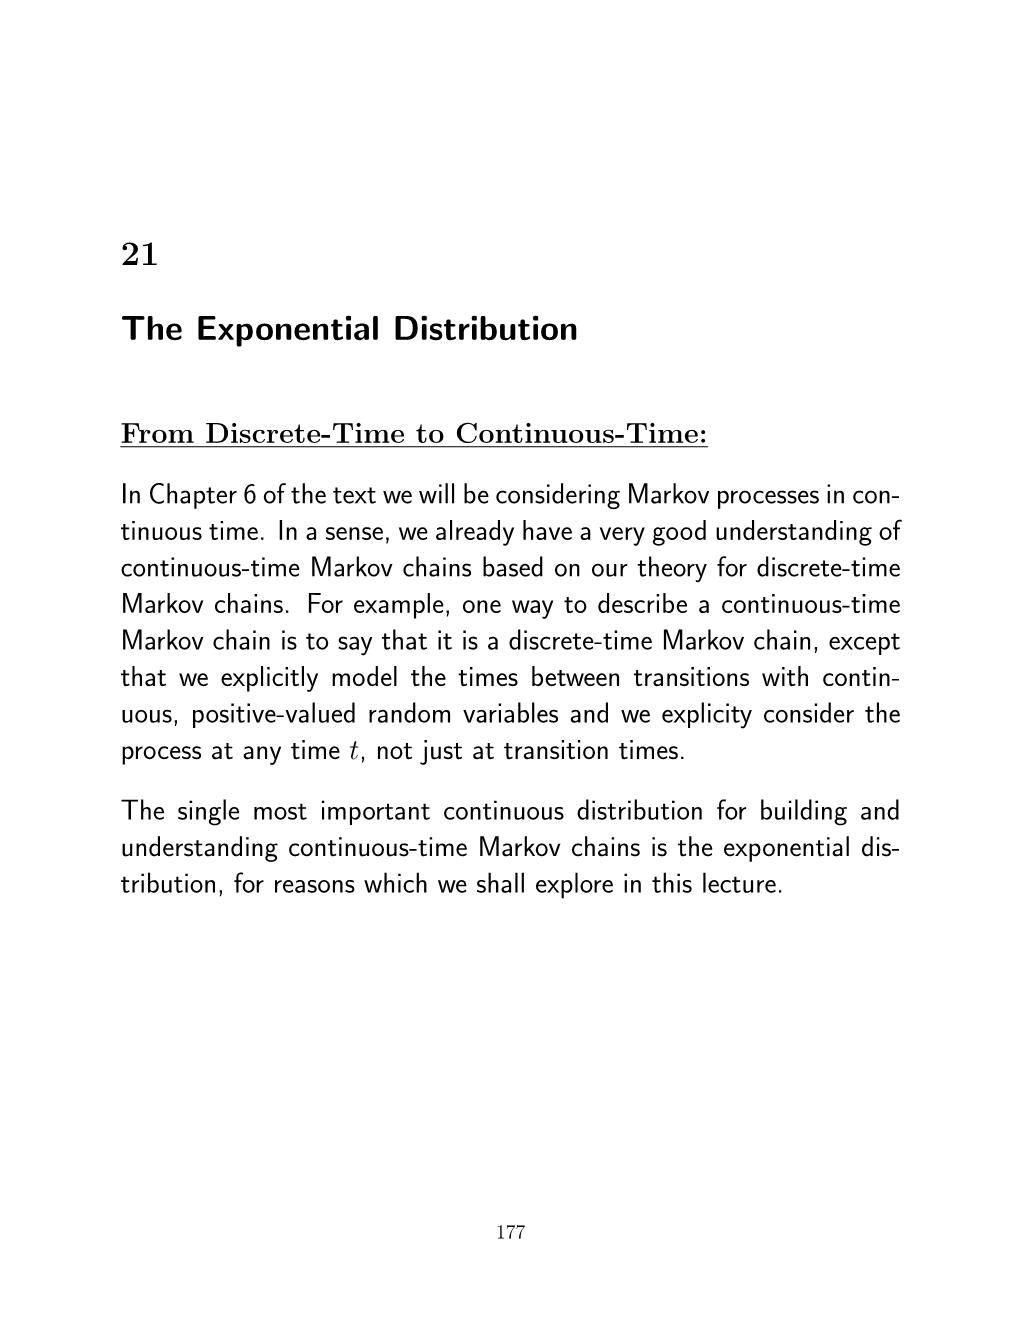 21 the Exponential Distribution